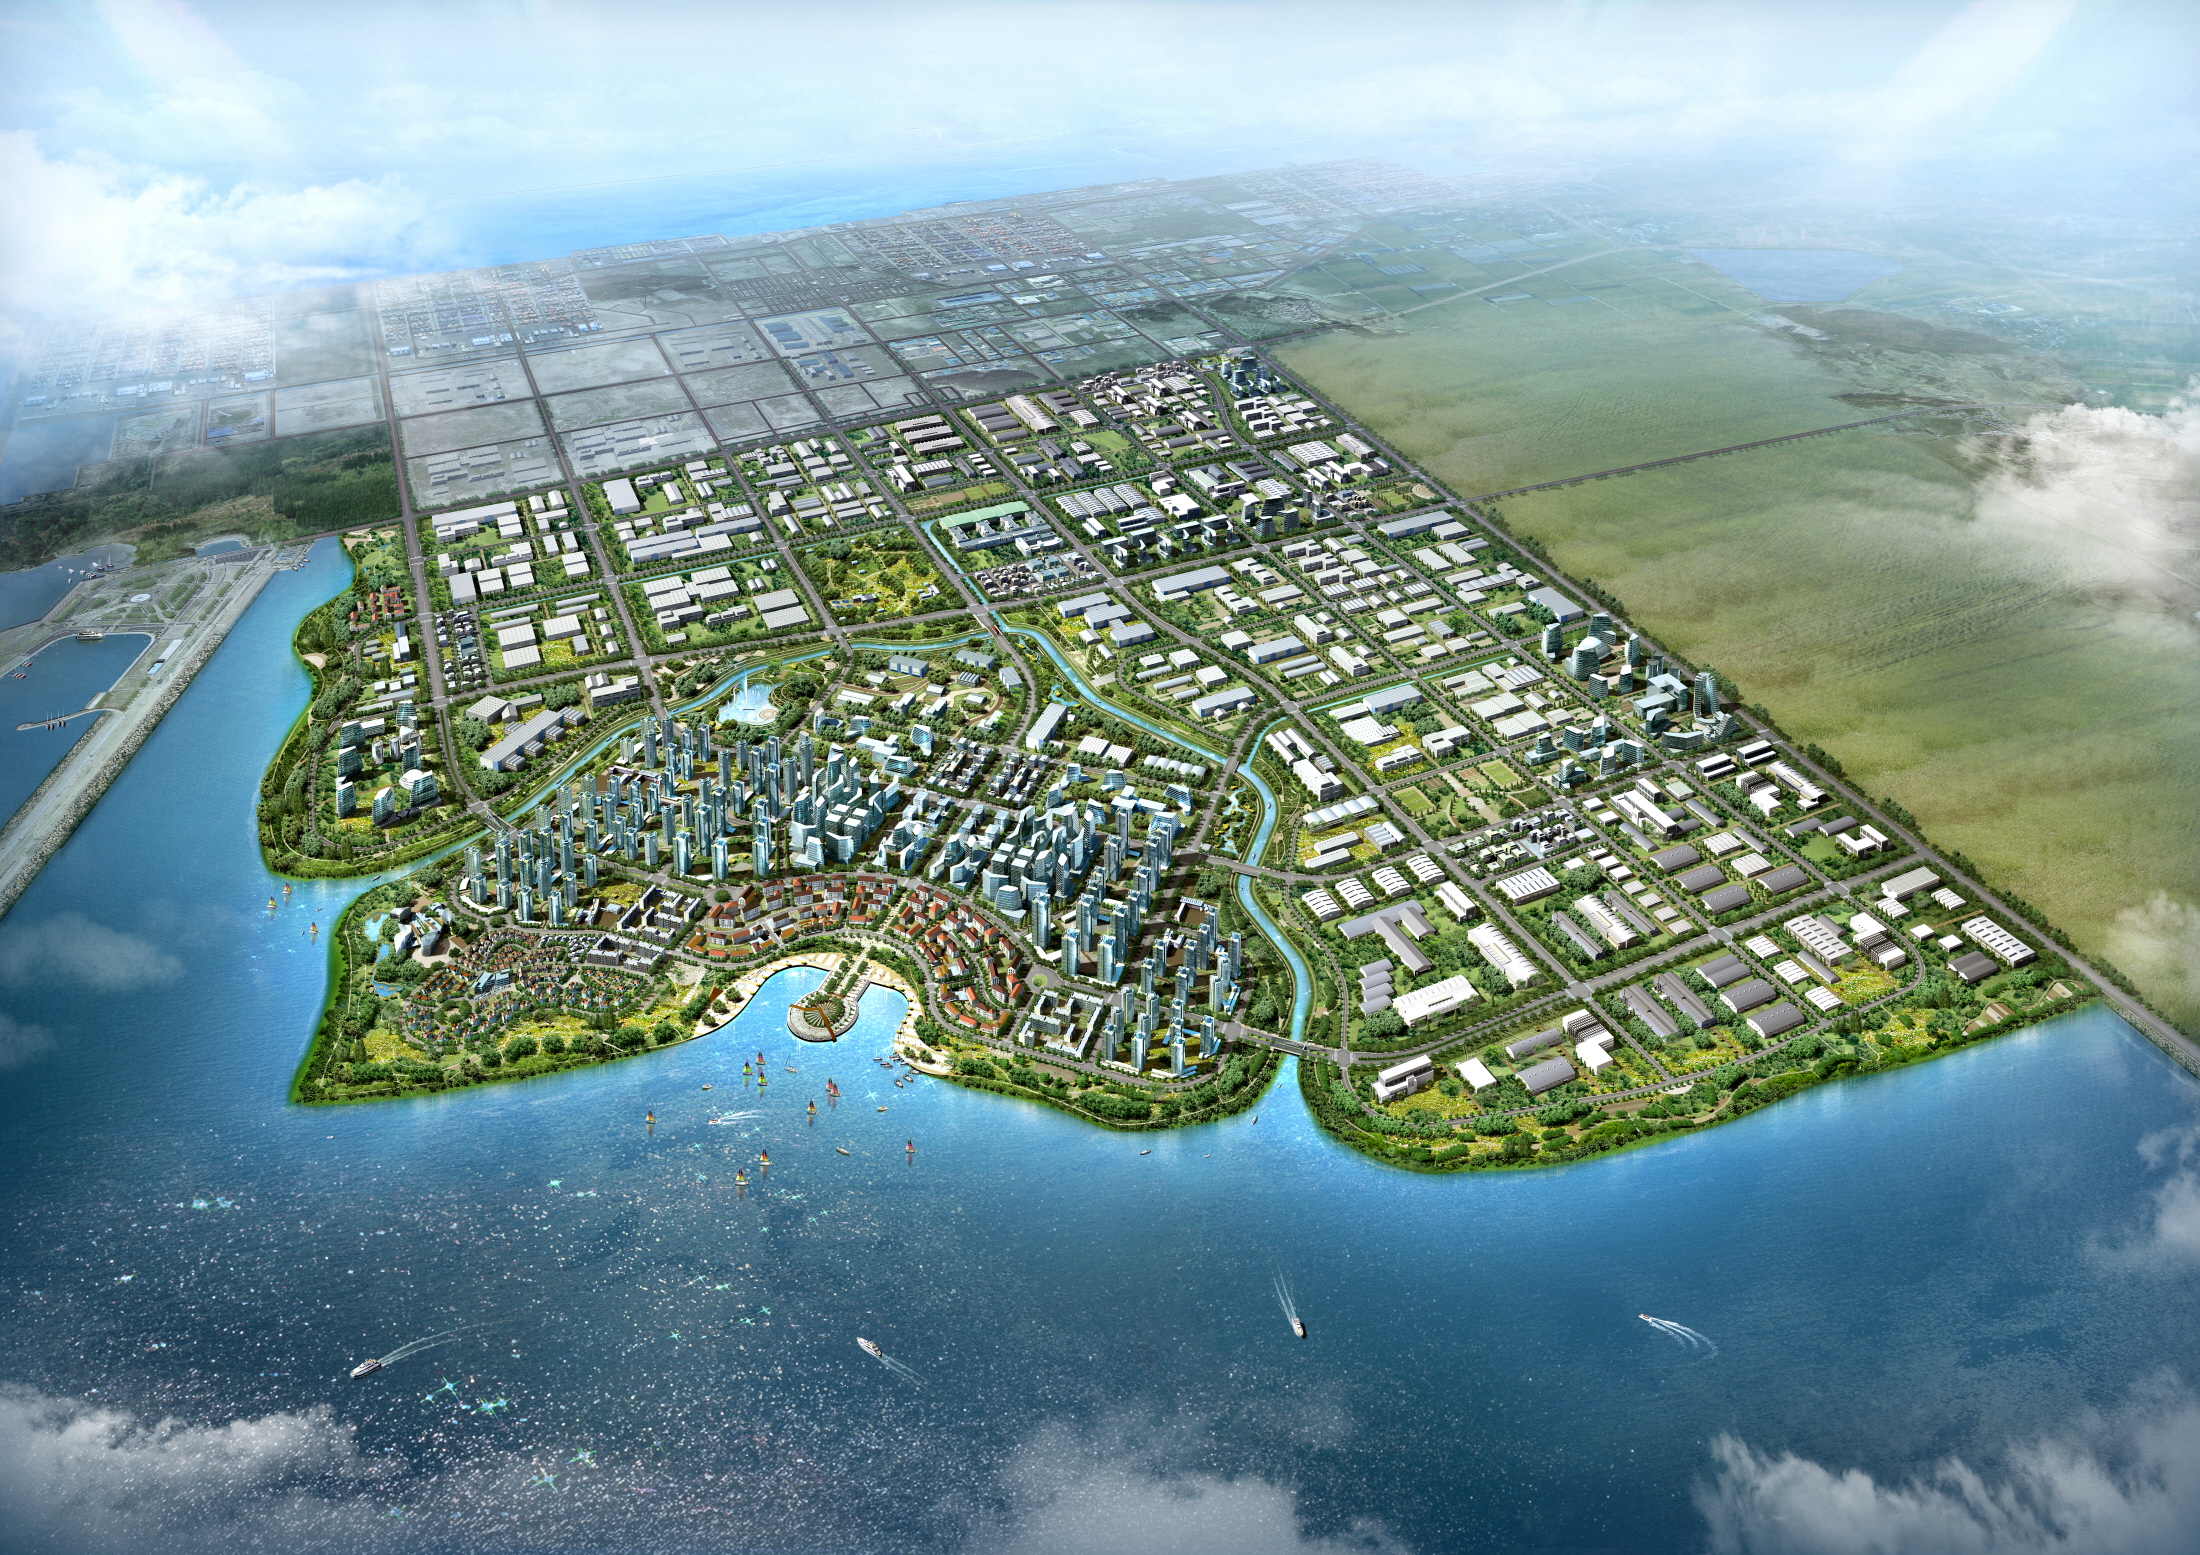 Where the world’s economy gathers, where the future economy begins, “Saemangum National Industrial Complex” in Atlantis, South Korea